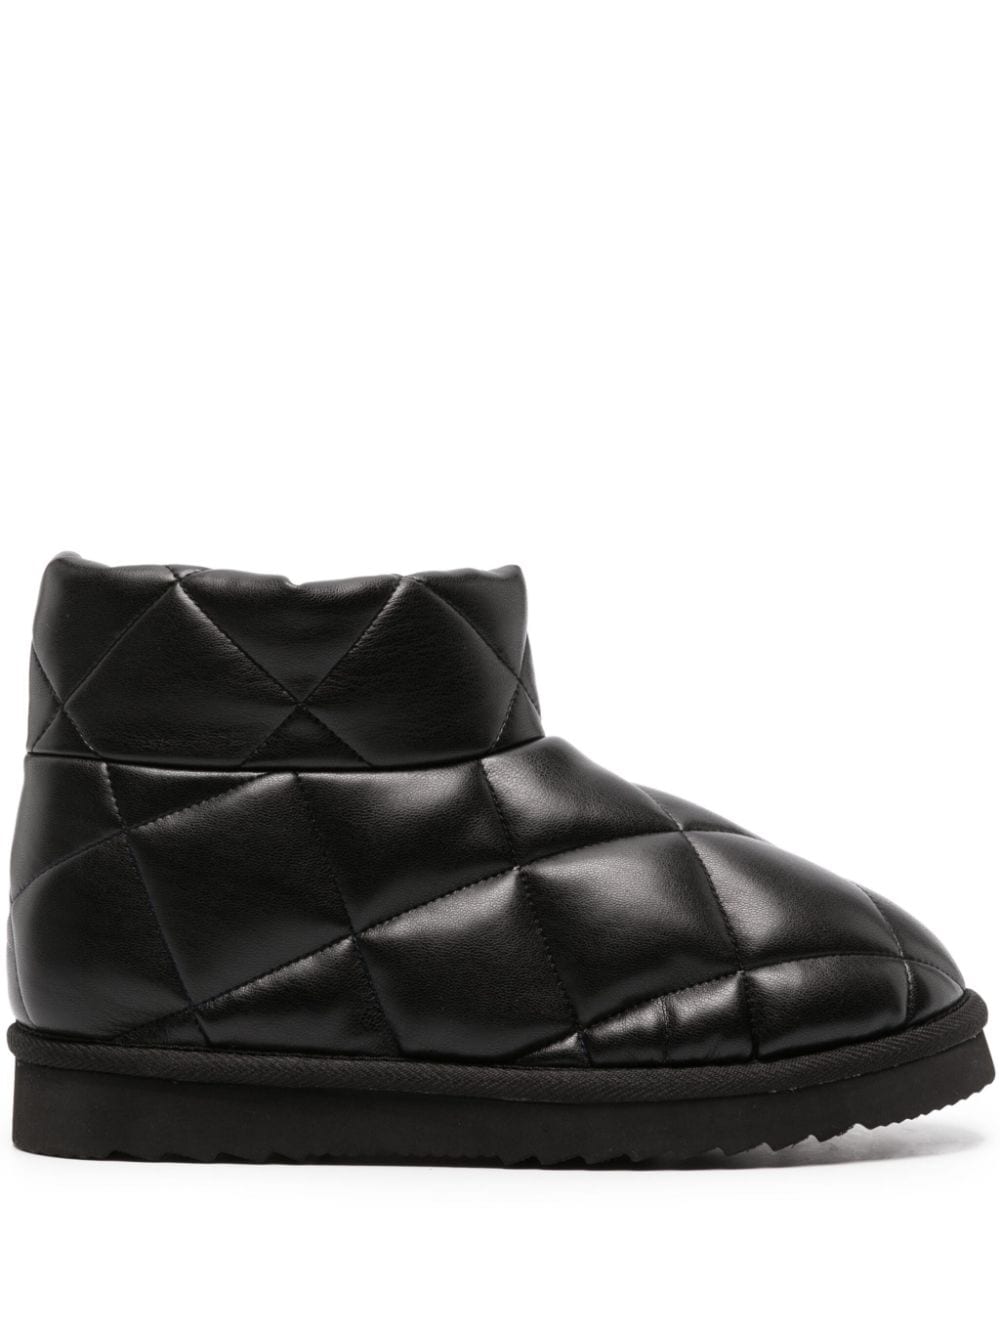 Beverley quilted ankle boots